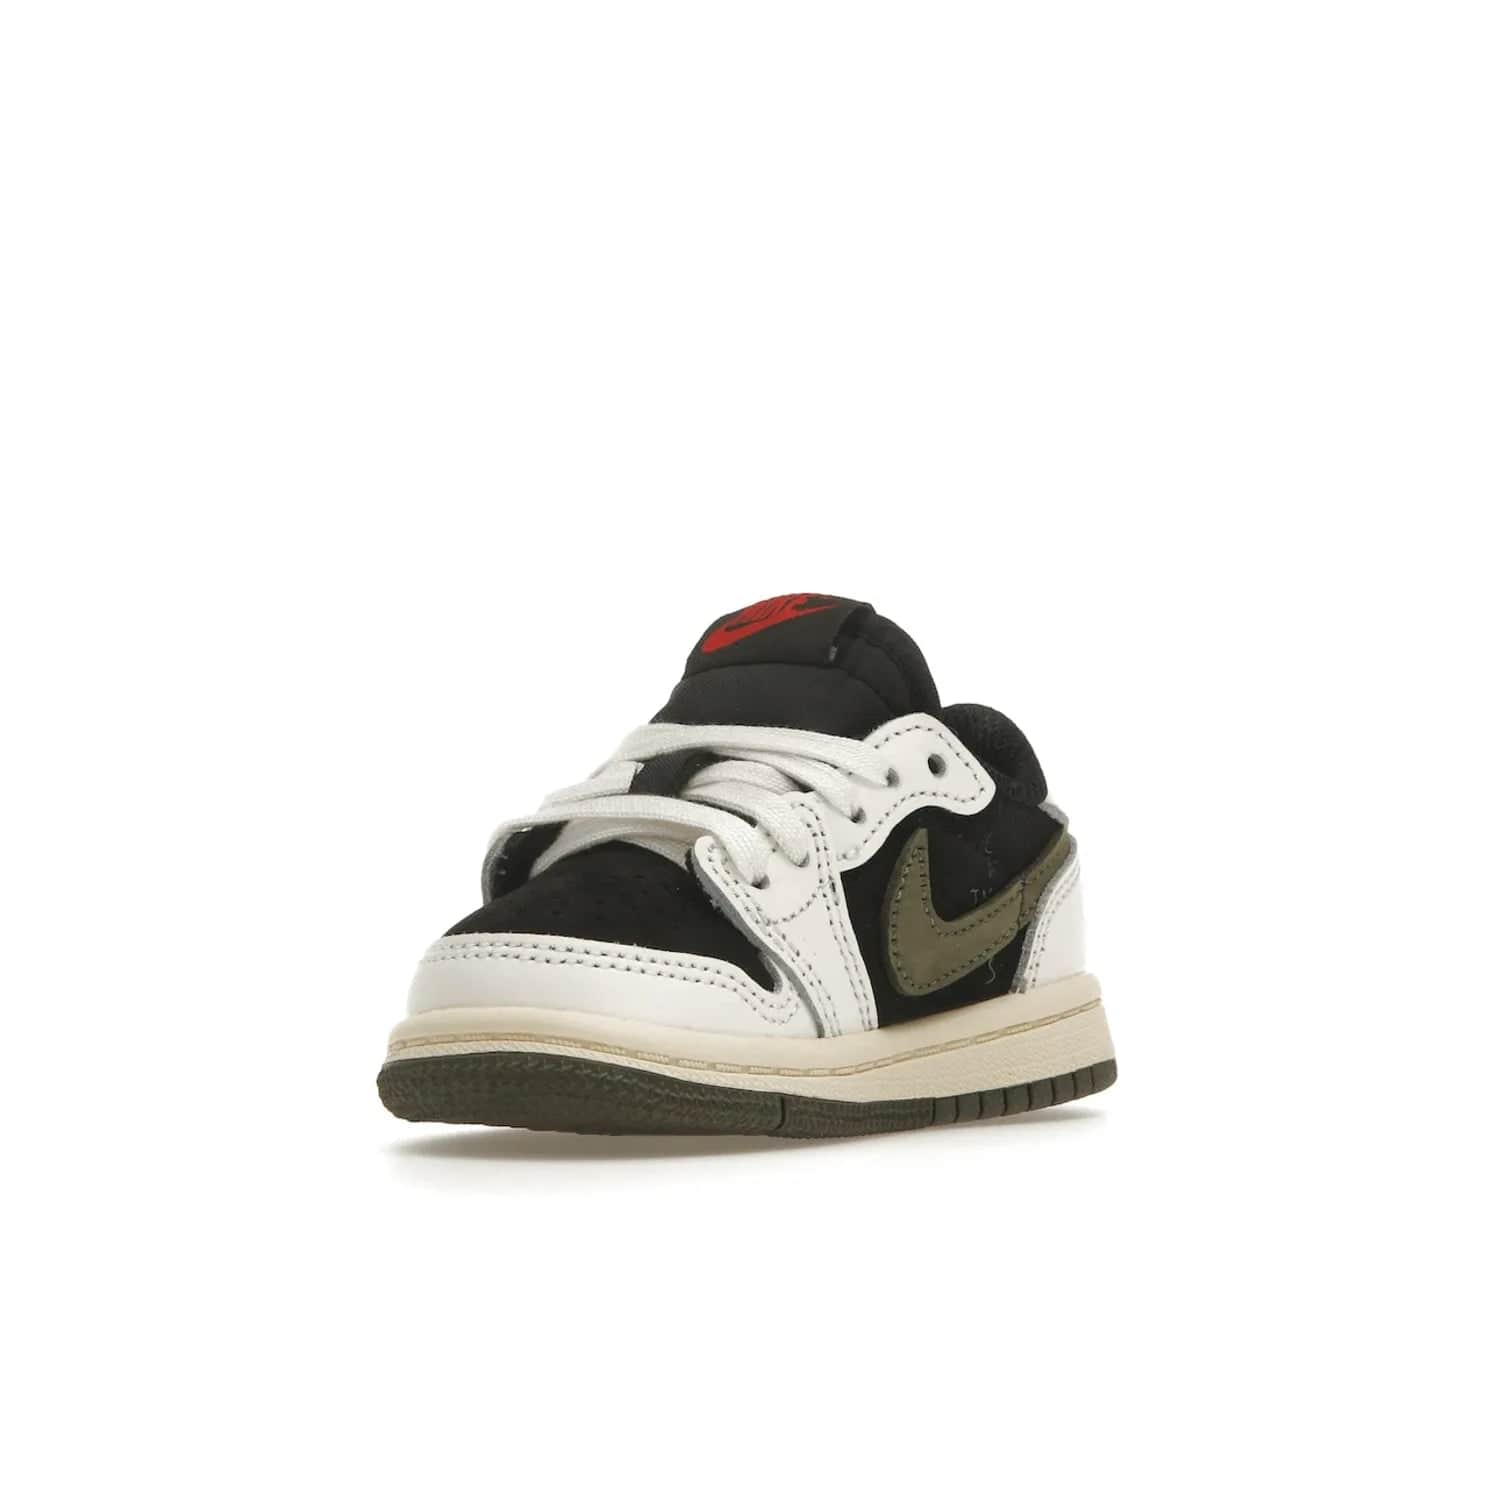 Jordan 1 Retro Low OG SP Travis Scott Olive (TD) - Image 14 - Only at www.BallersClubKickz.com - Get the iconic style & comfort you love with the Jordan 1 Retro Low OG SP Travis Scott Olive. Featuring a premium upper, Sail, Red, Black & Olive colorway & a durable rubber outsole for traction & cushioning. Get it now!